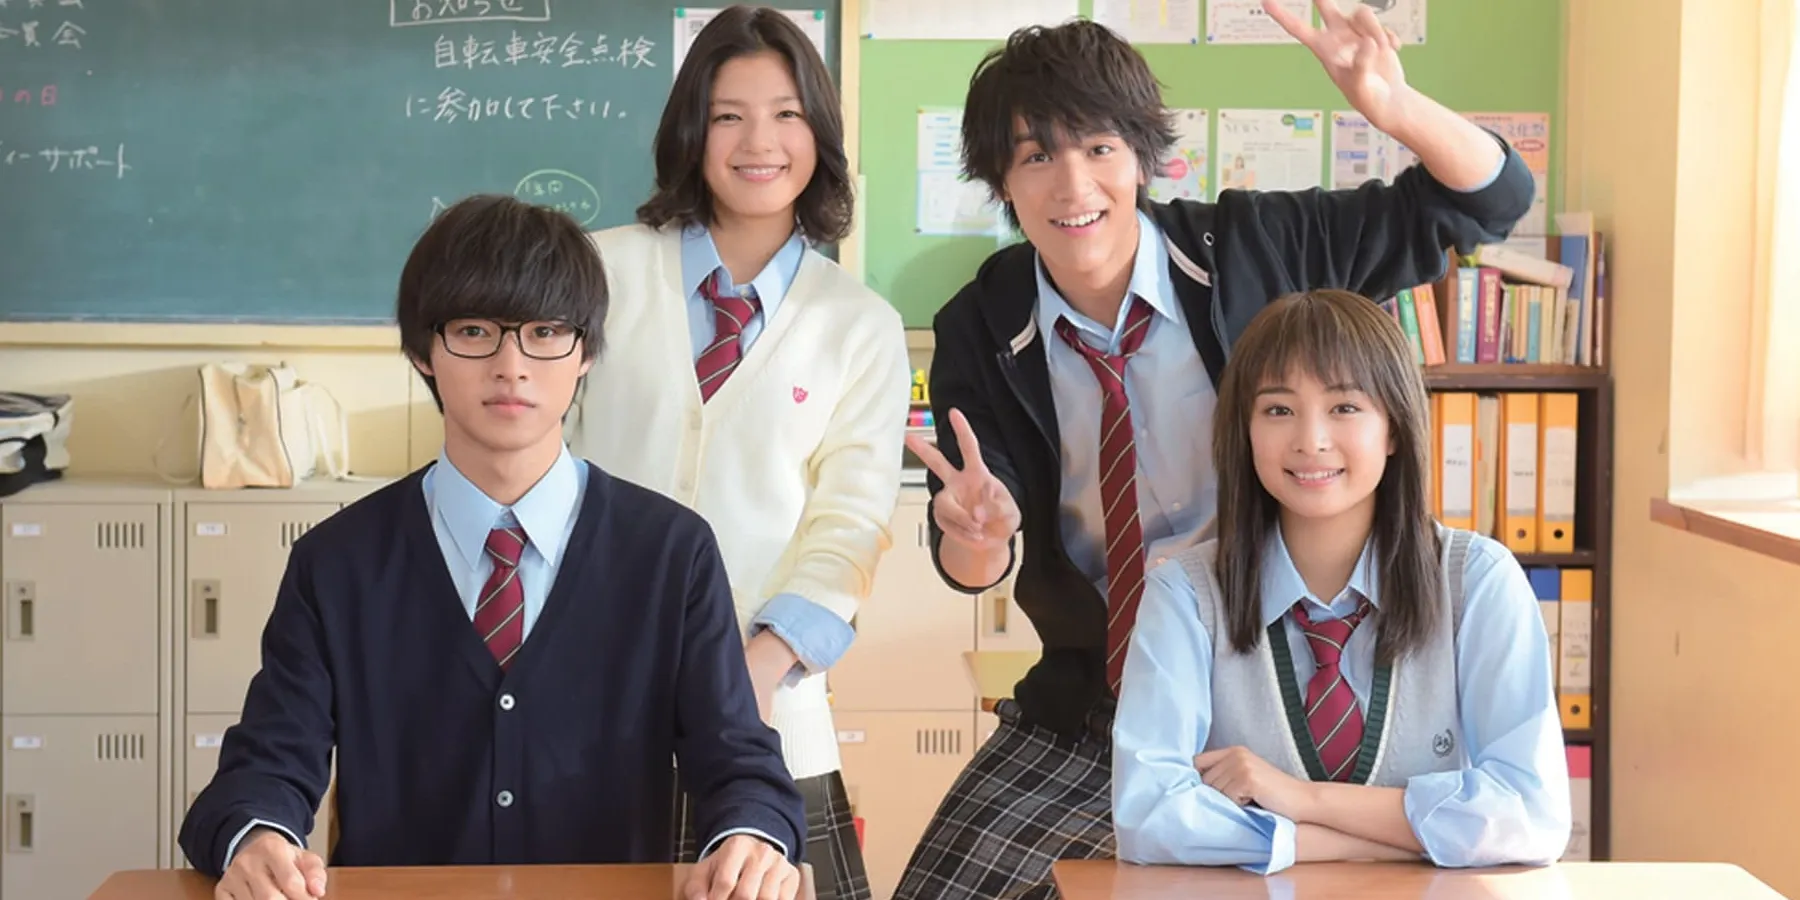 Your Lie In April 2016 live action movie